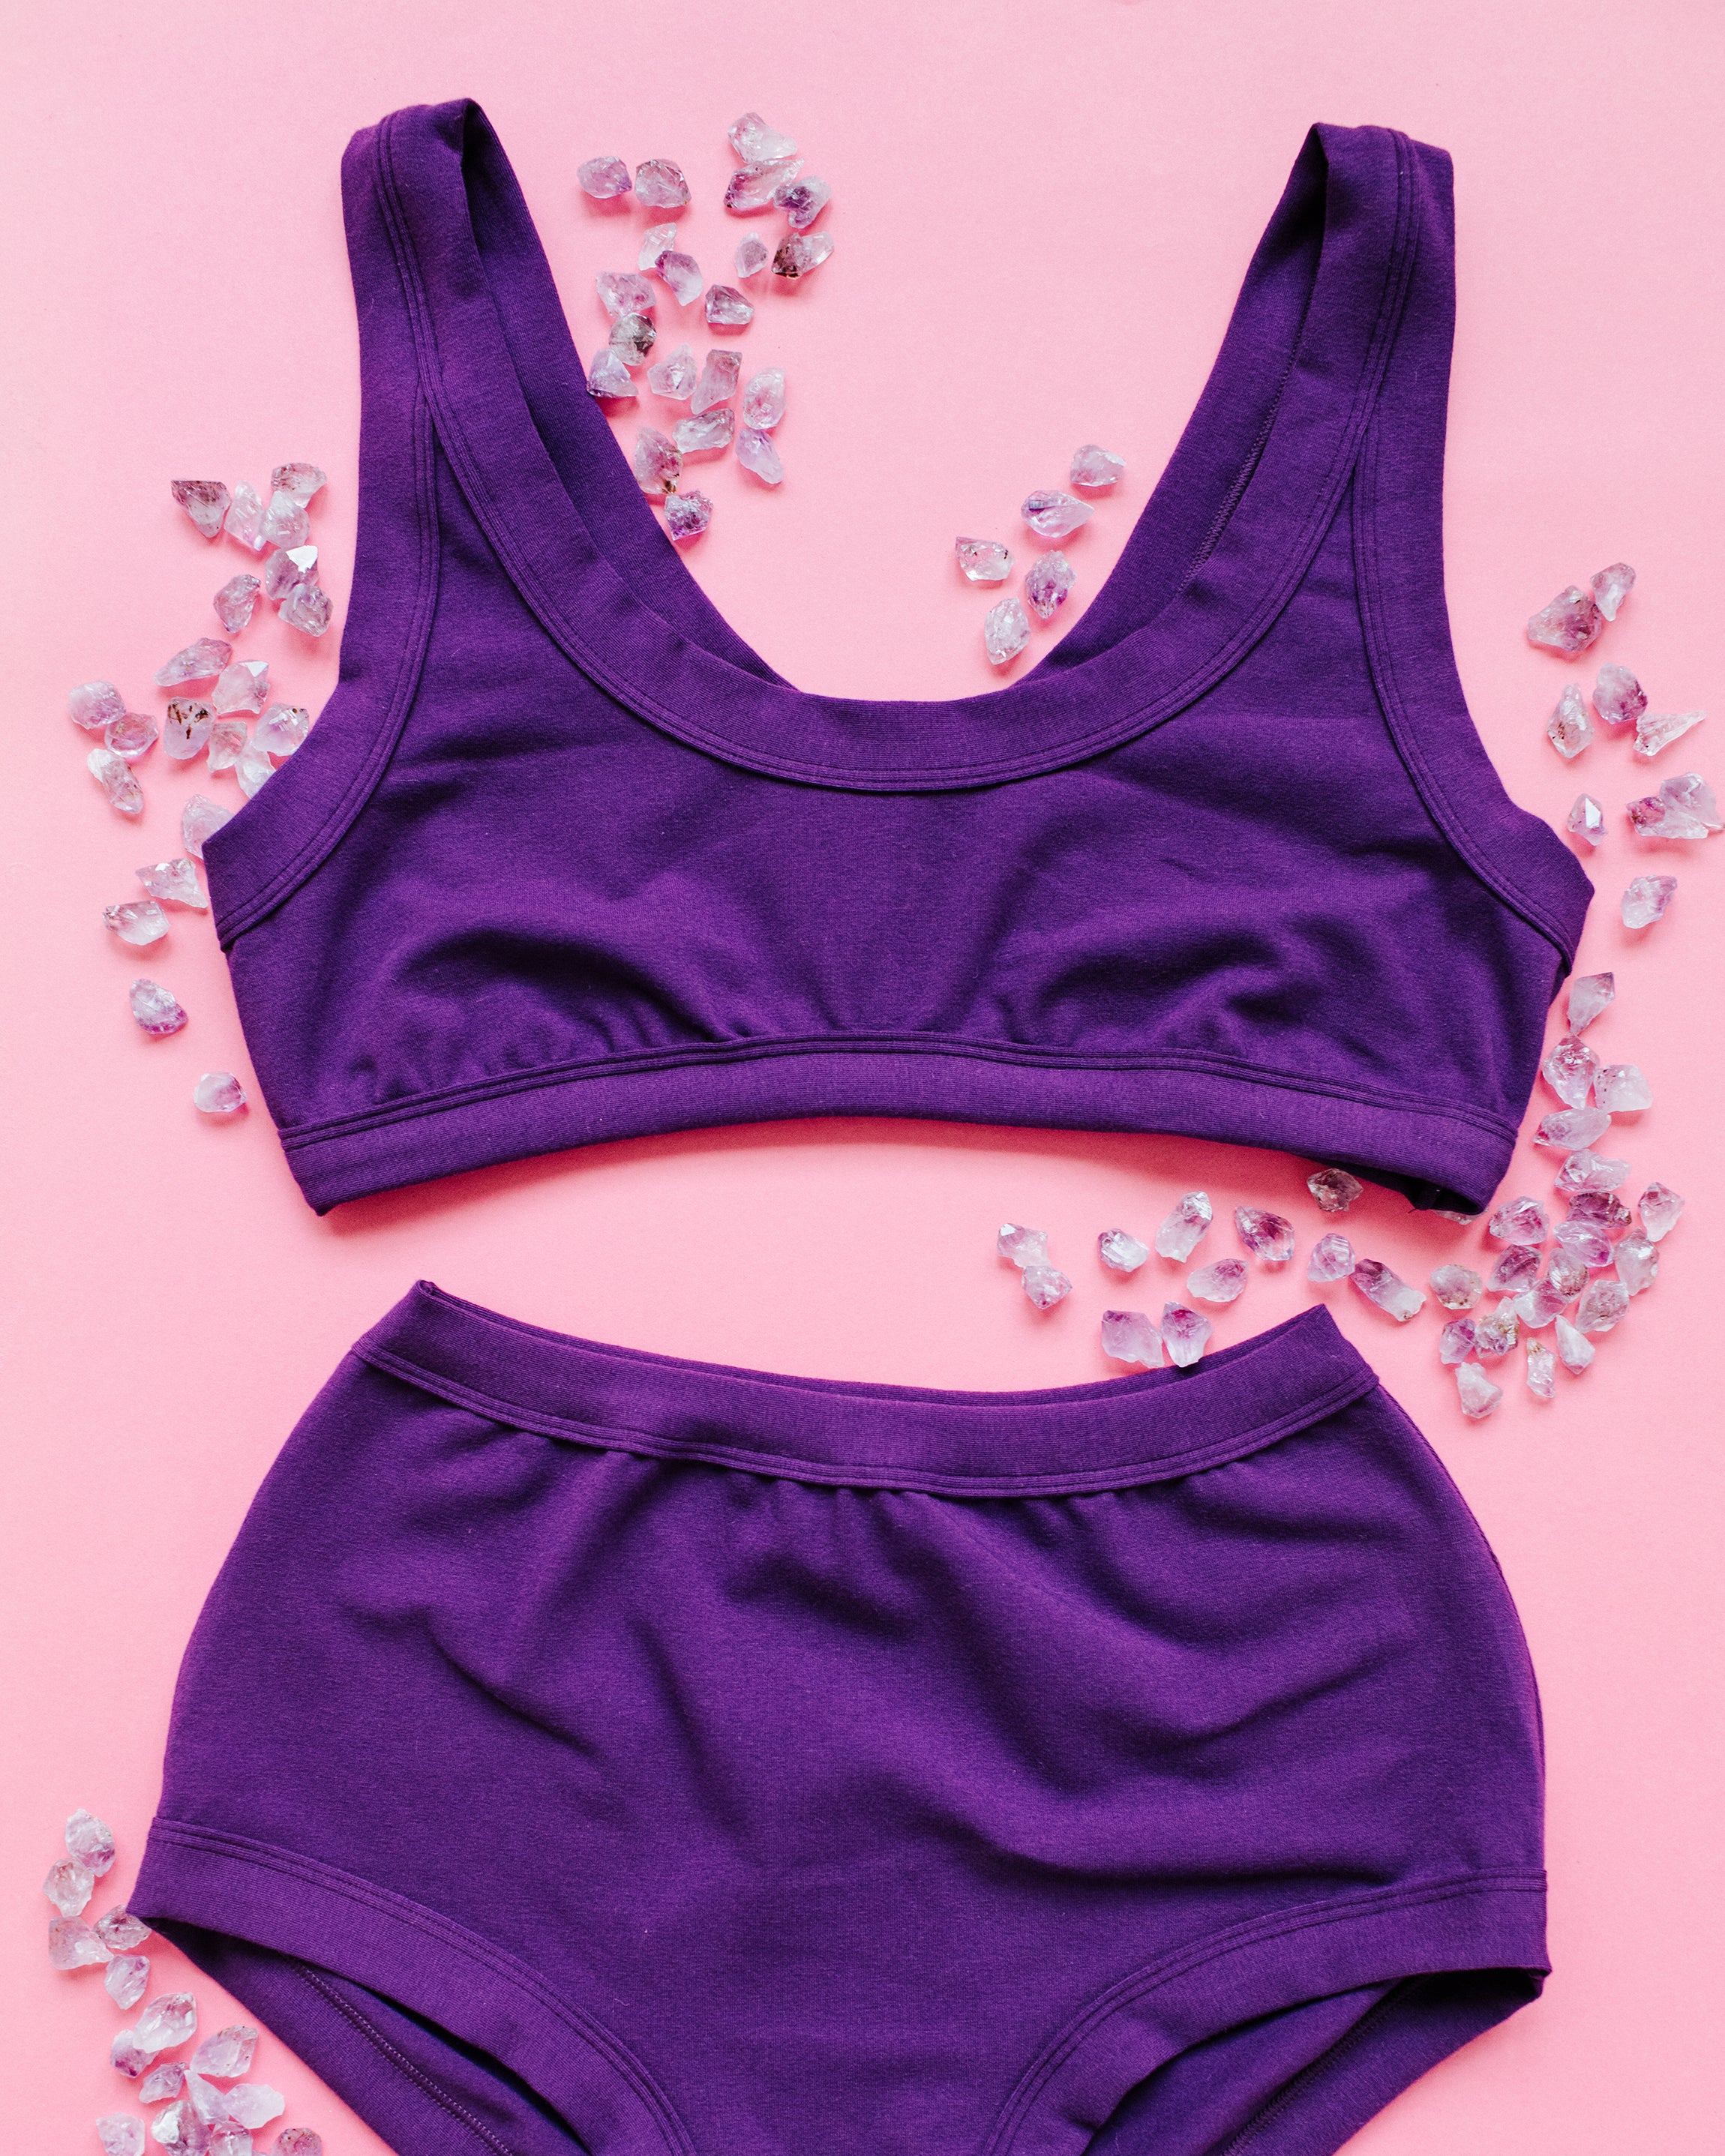 Flat lay of purple Deep Amethyst Bralette and Original style underwear on a pink backdrop with small amethyst stones surrounding it.